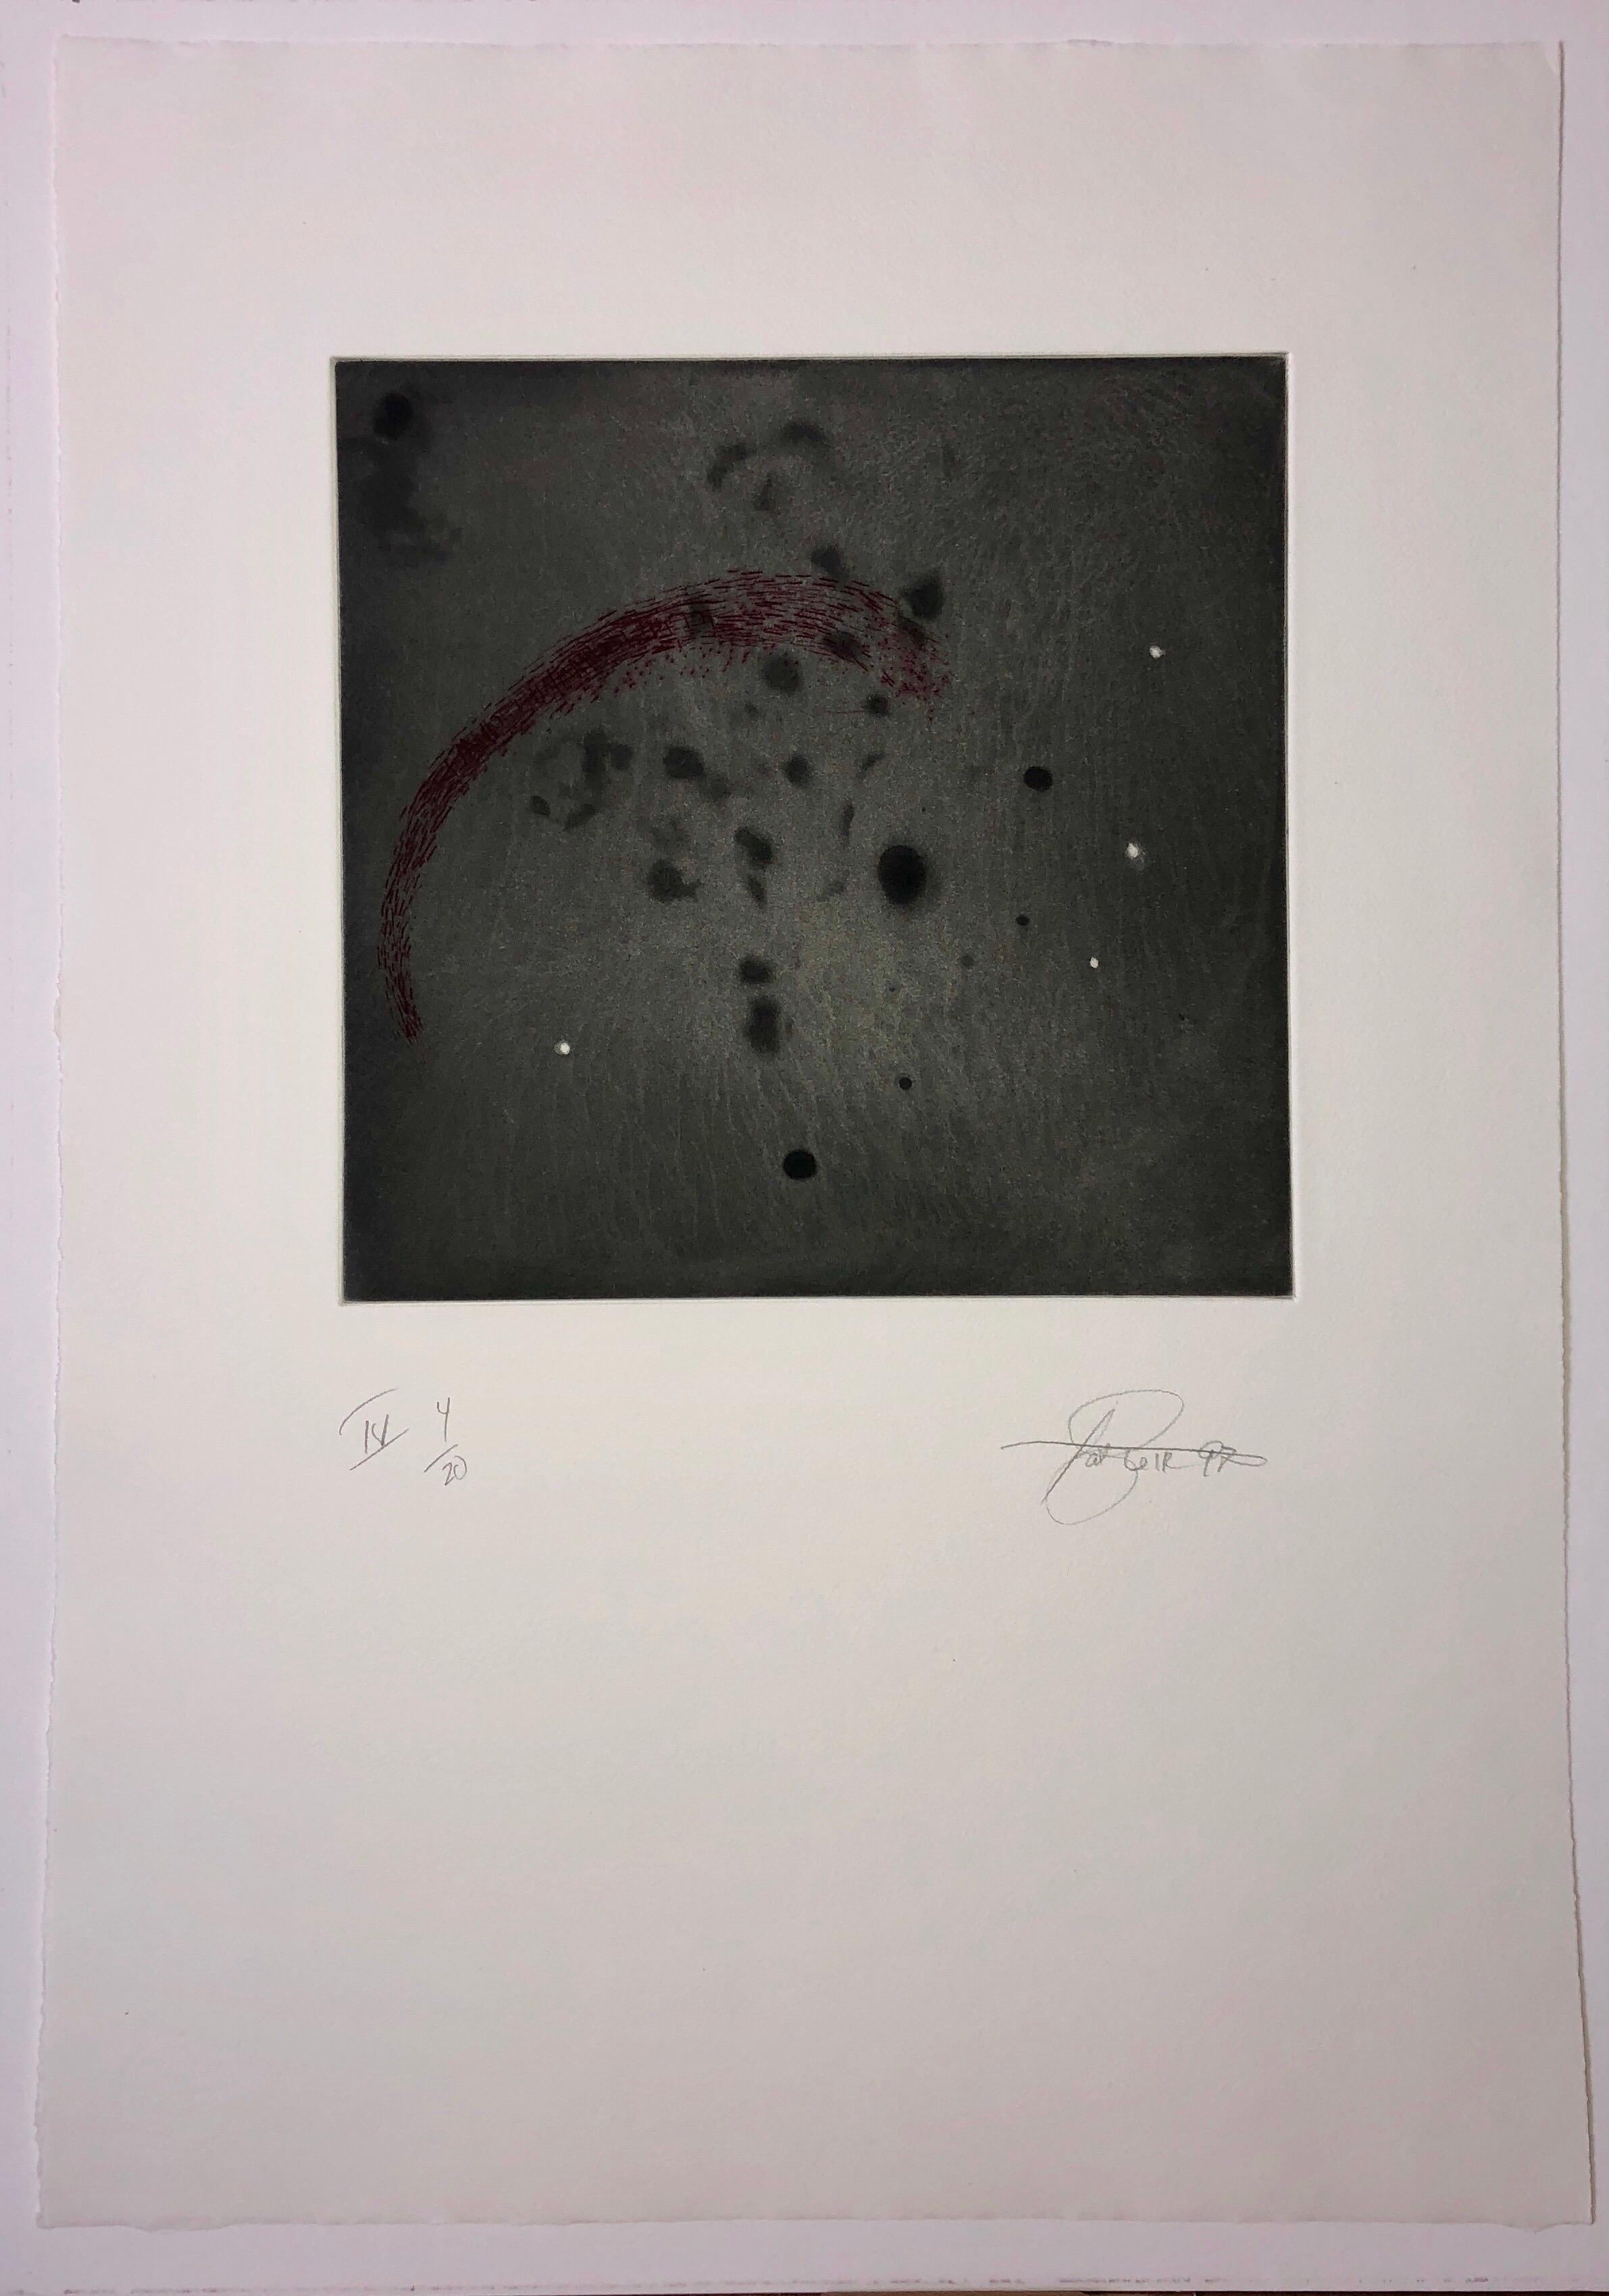 Comet, Outer Space Dark Series Aquatinte Etching Color Abstract Expressionist  en vente 2